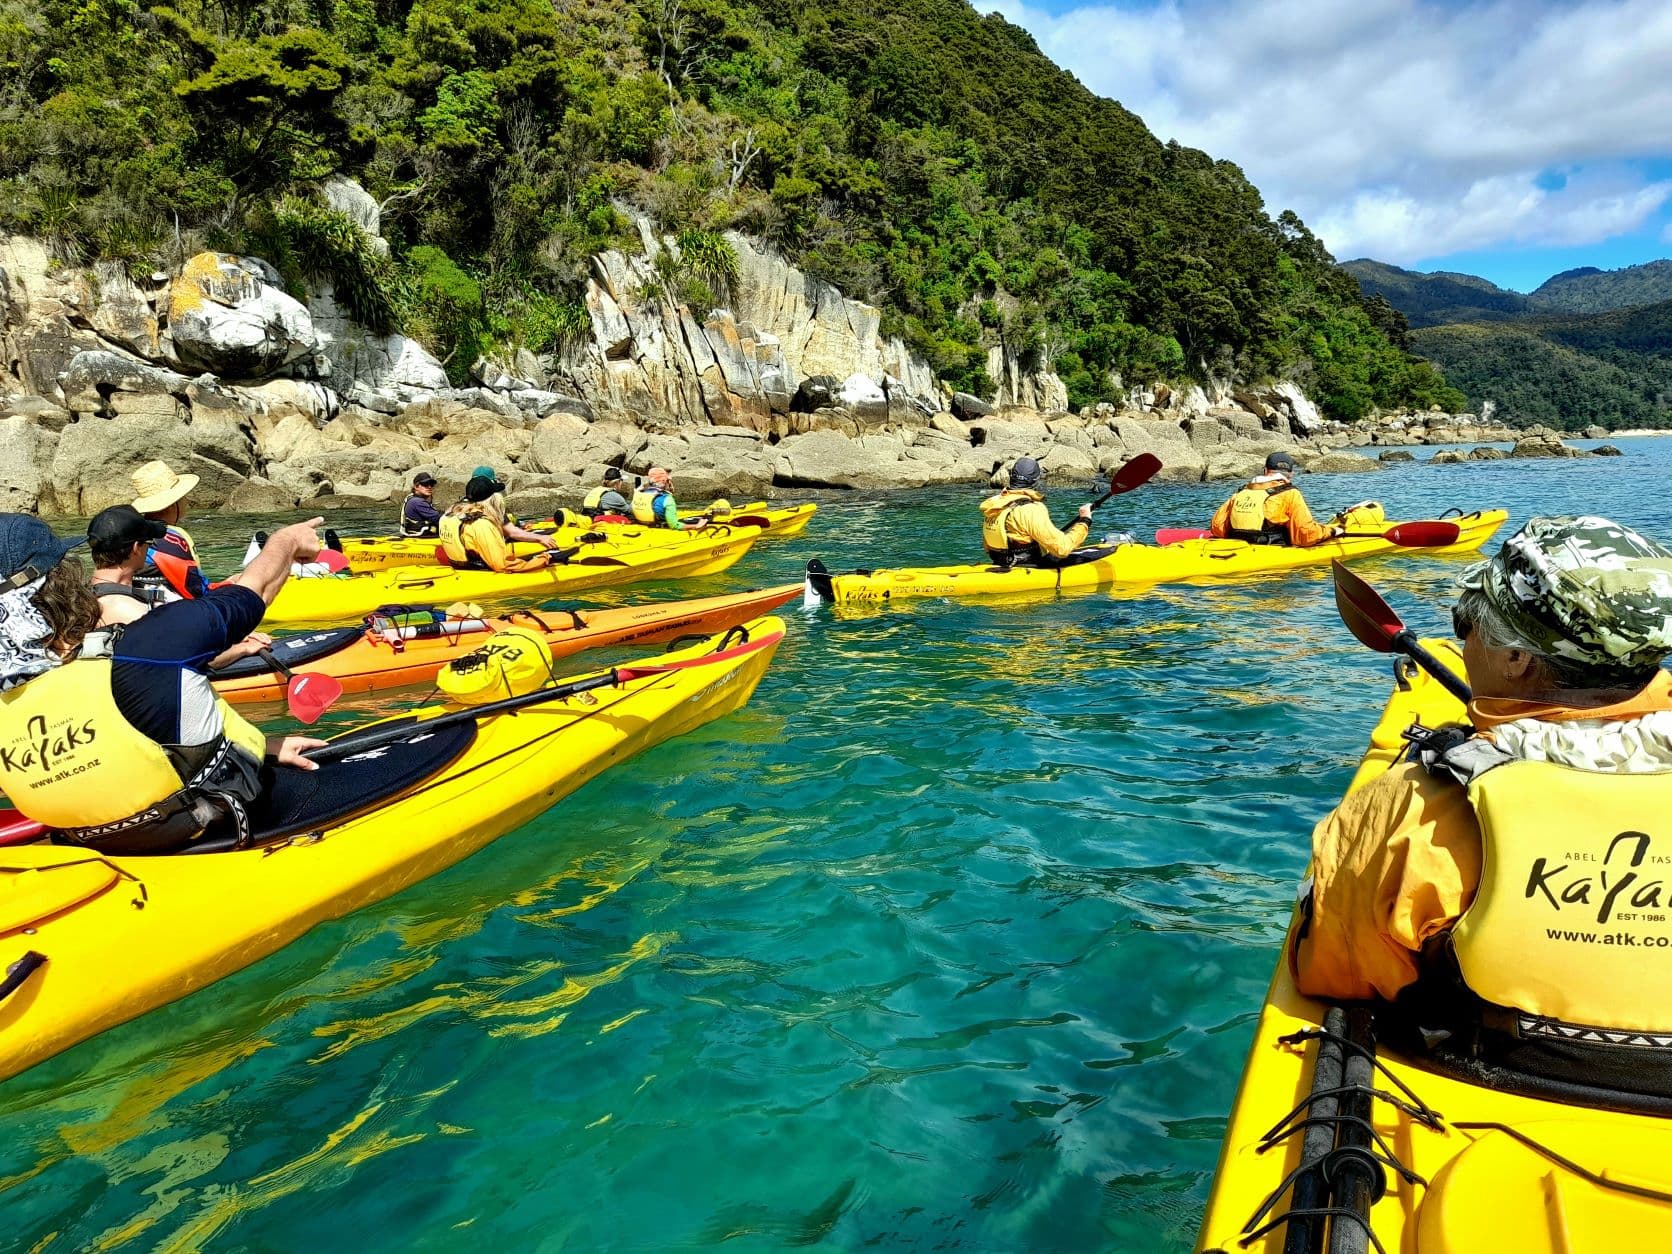 A group of clients on a kayak tour